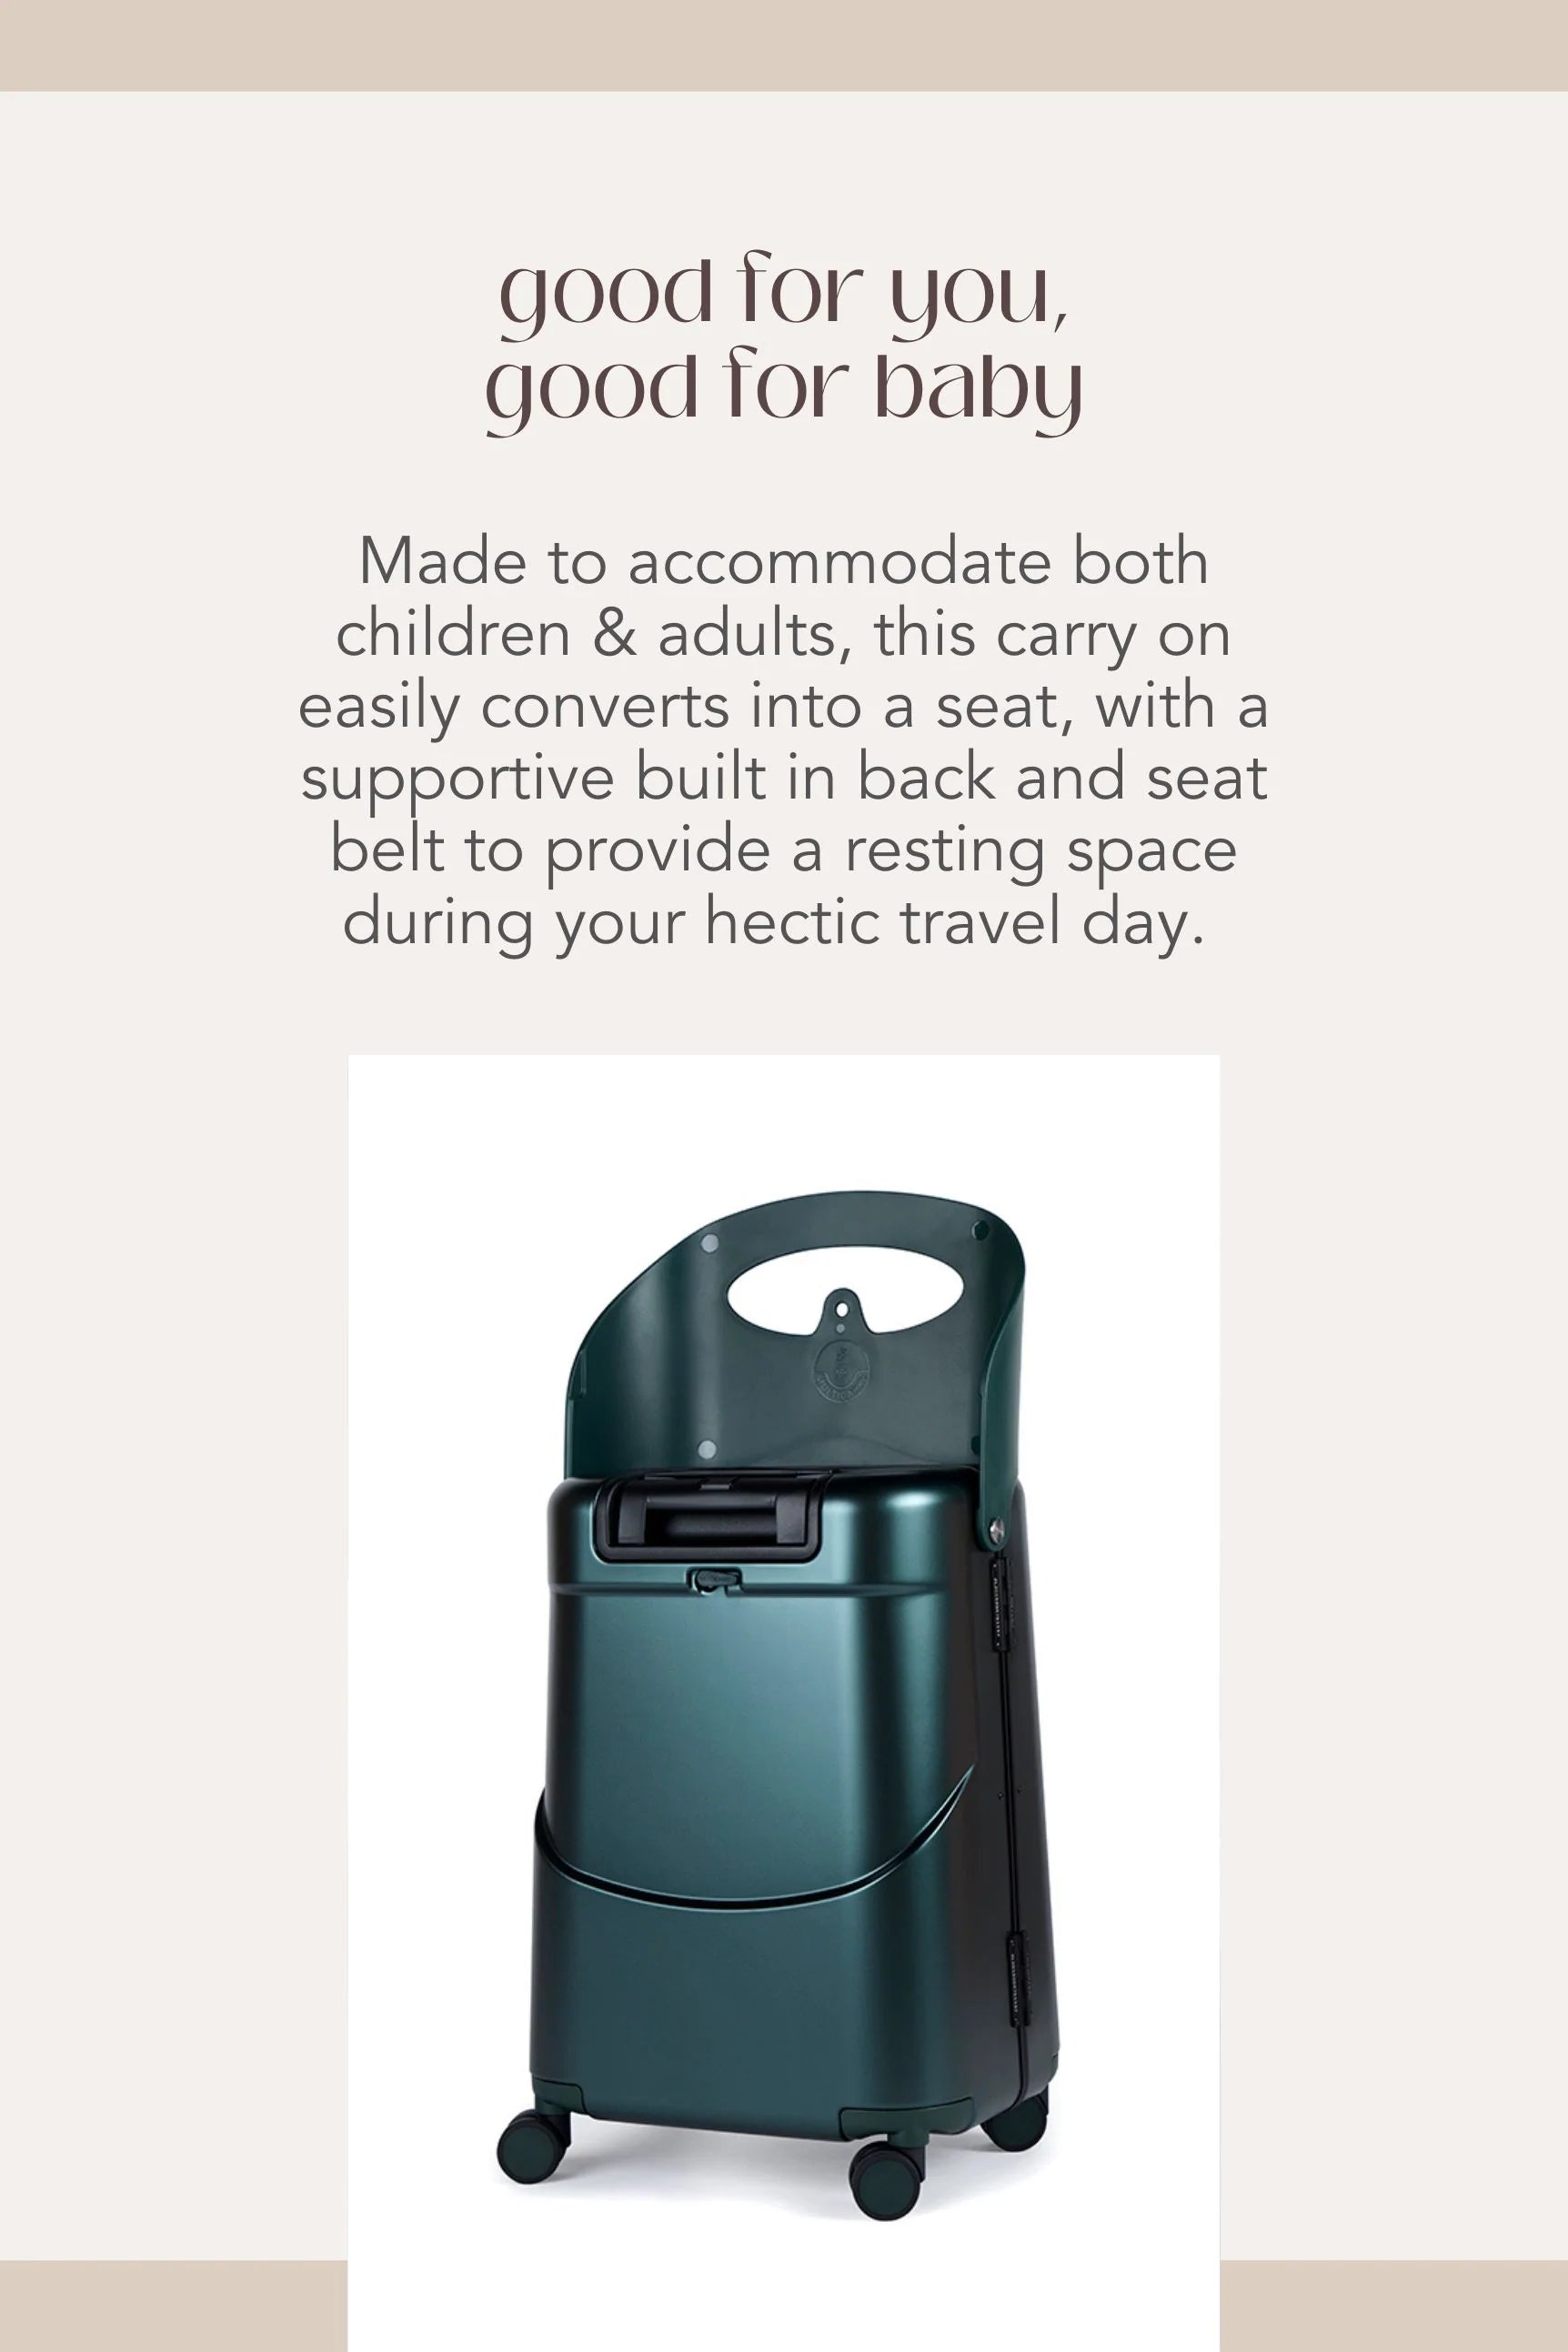 miamily luggage for kids and adults